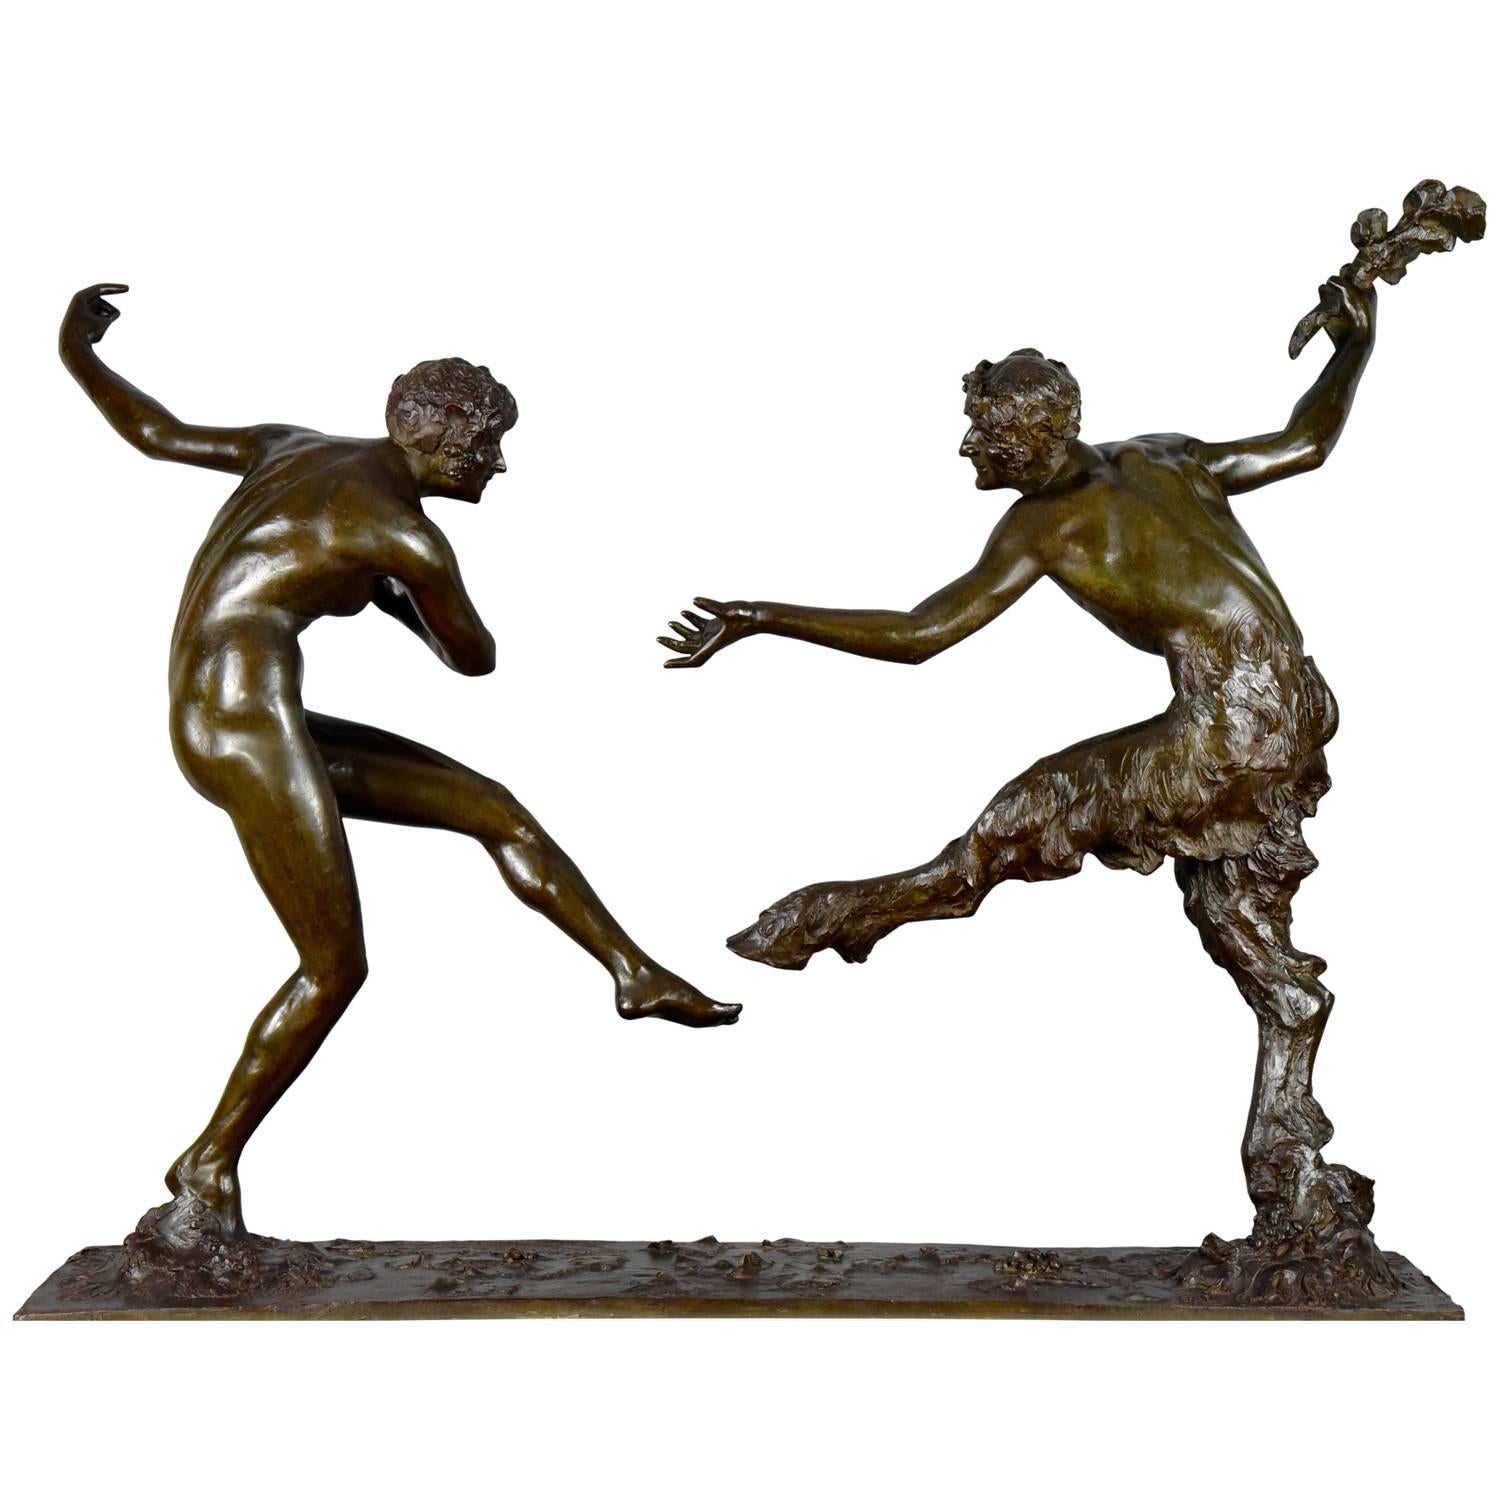 Unique Art Deco bronze sculpture of a nude en satyr dancing.
Impressive size. Measures: L: 42.5 inch.
This bronze was a special order for a friend of the artist.
Above the signature is written “Amicalement” which means “friendly”
Guiraud